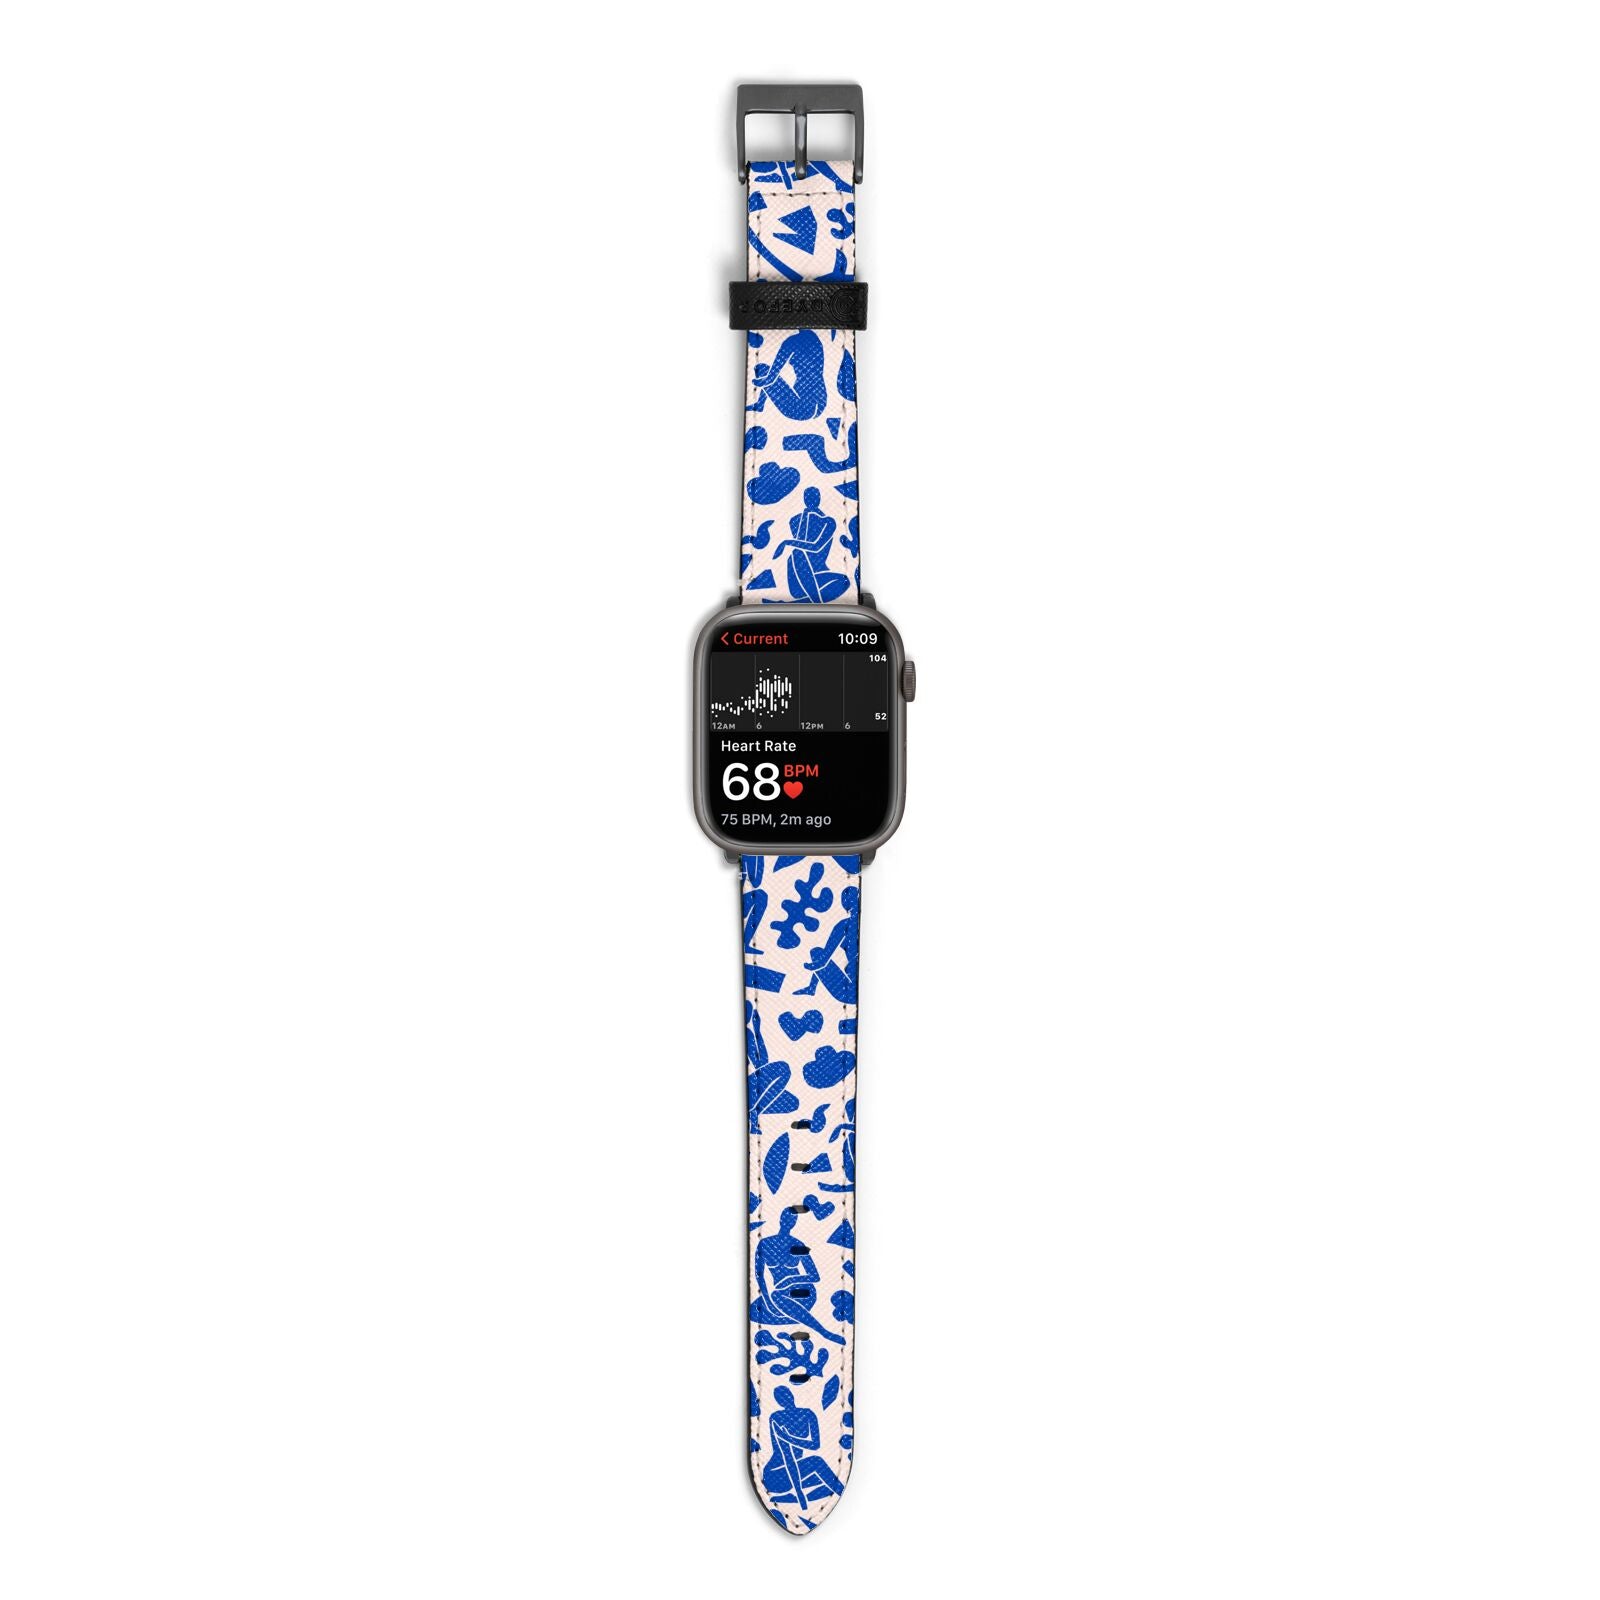 Abstract Art Apple Watch Strap Size 38mm with Space Grey Hardware